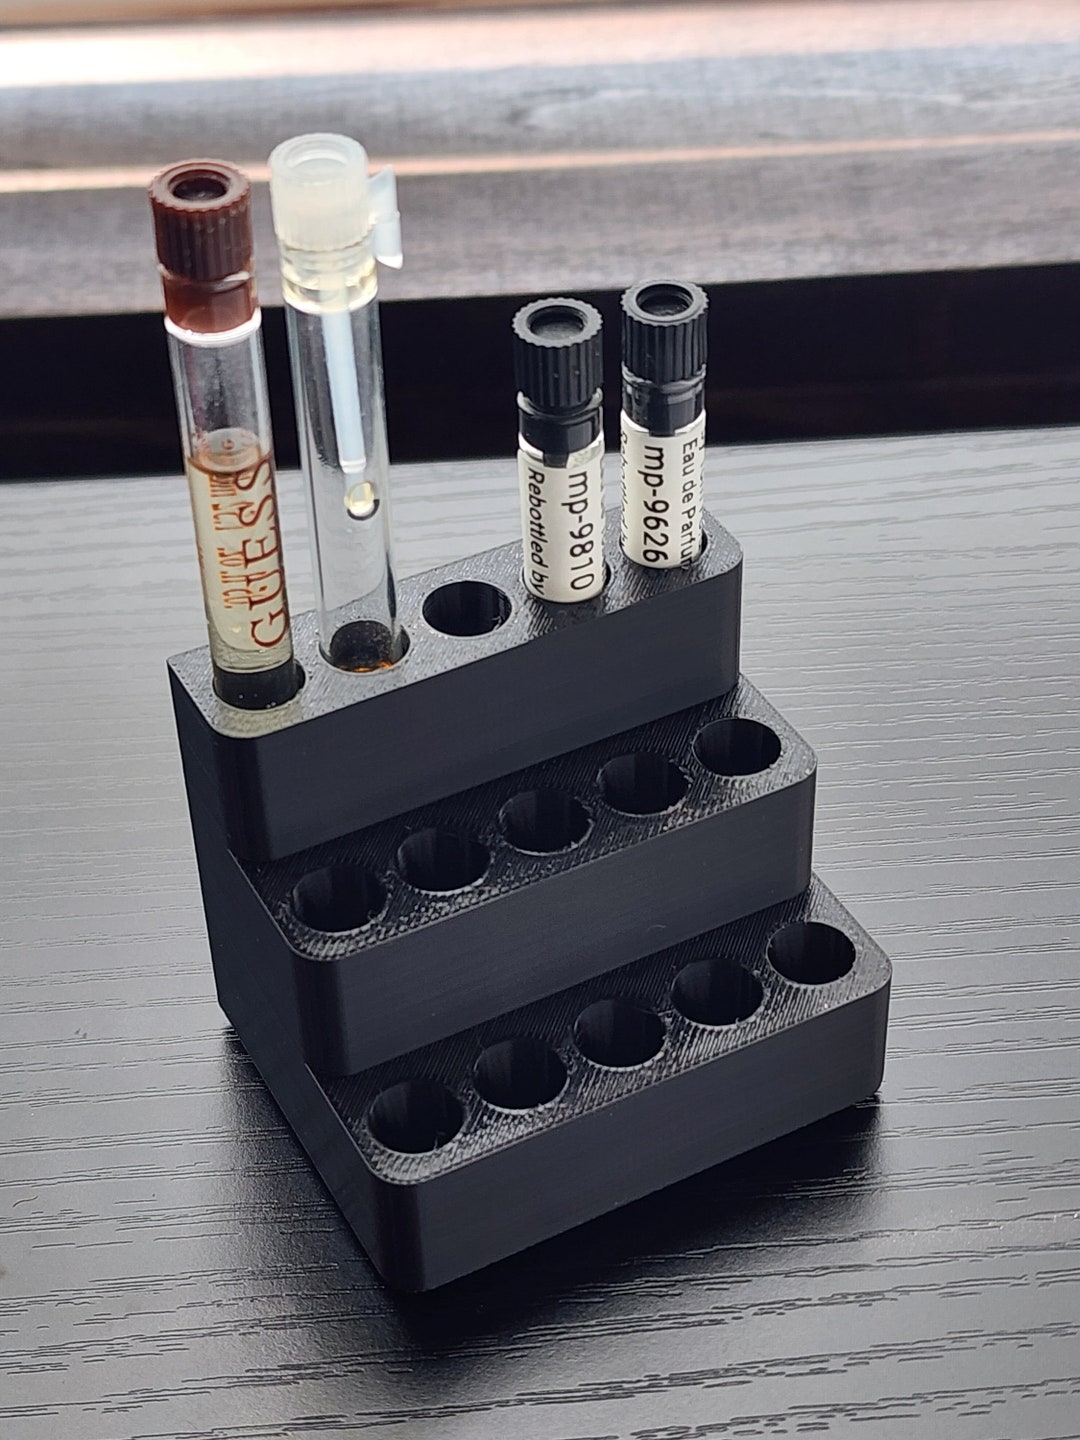 An individual vial holder that can holds up to six 4 ml (1 dram)